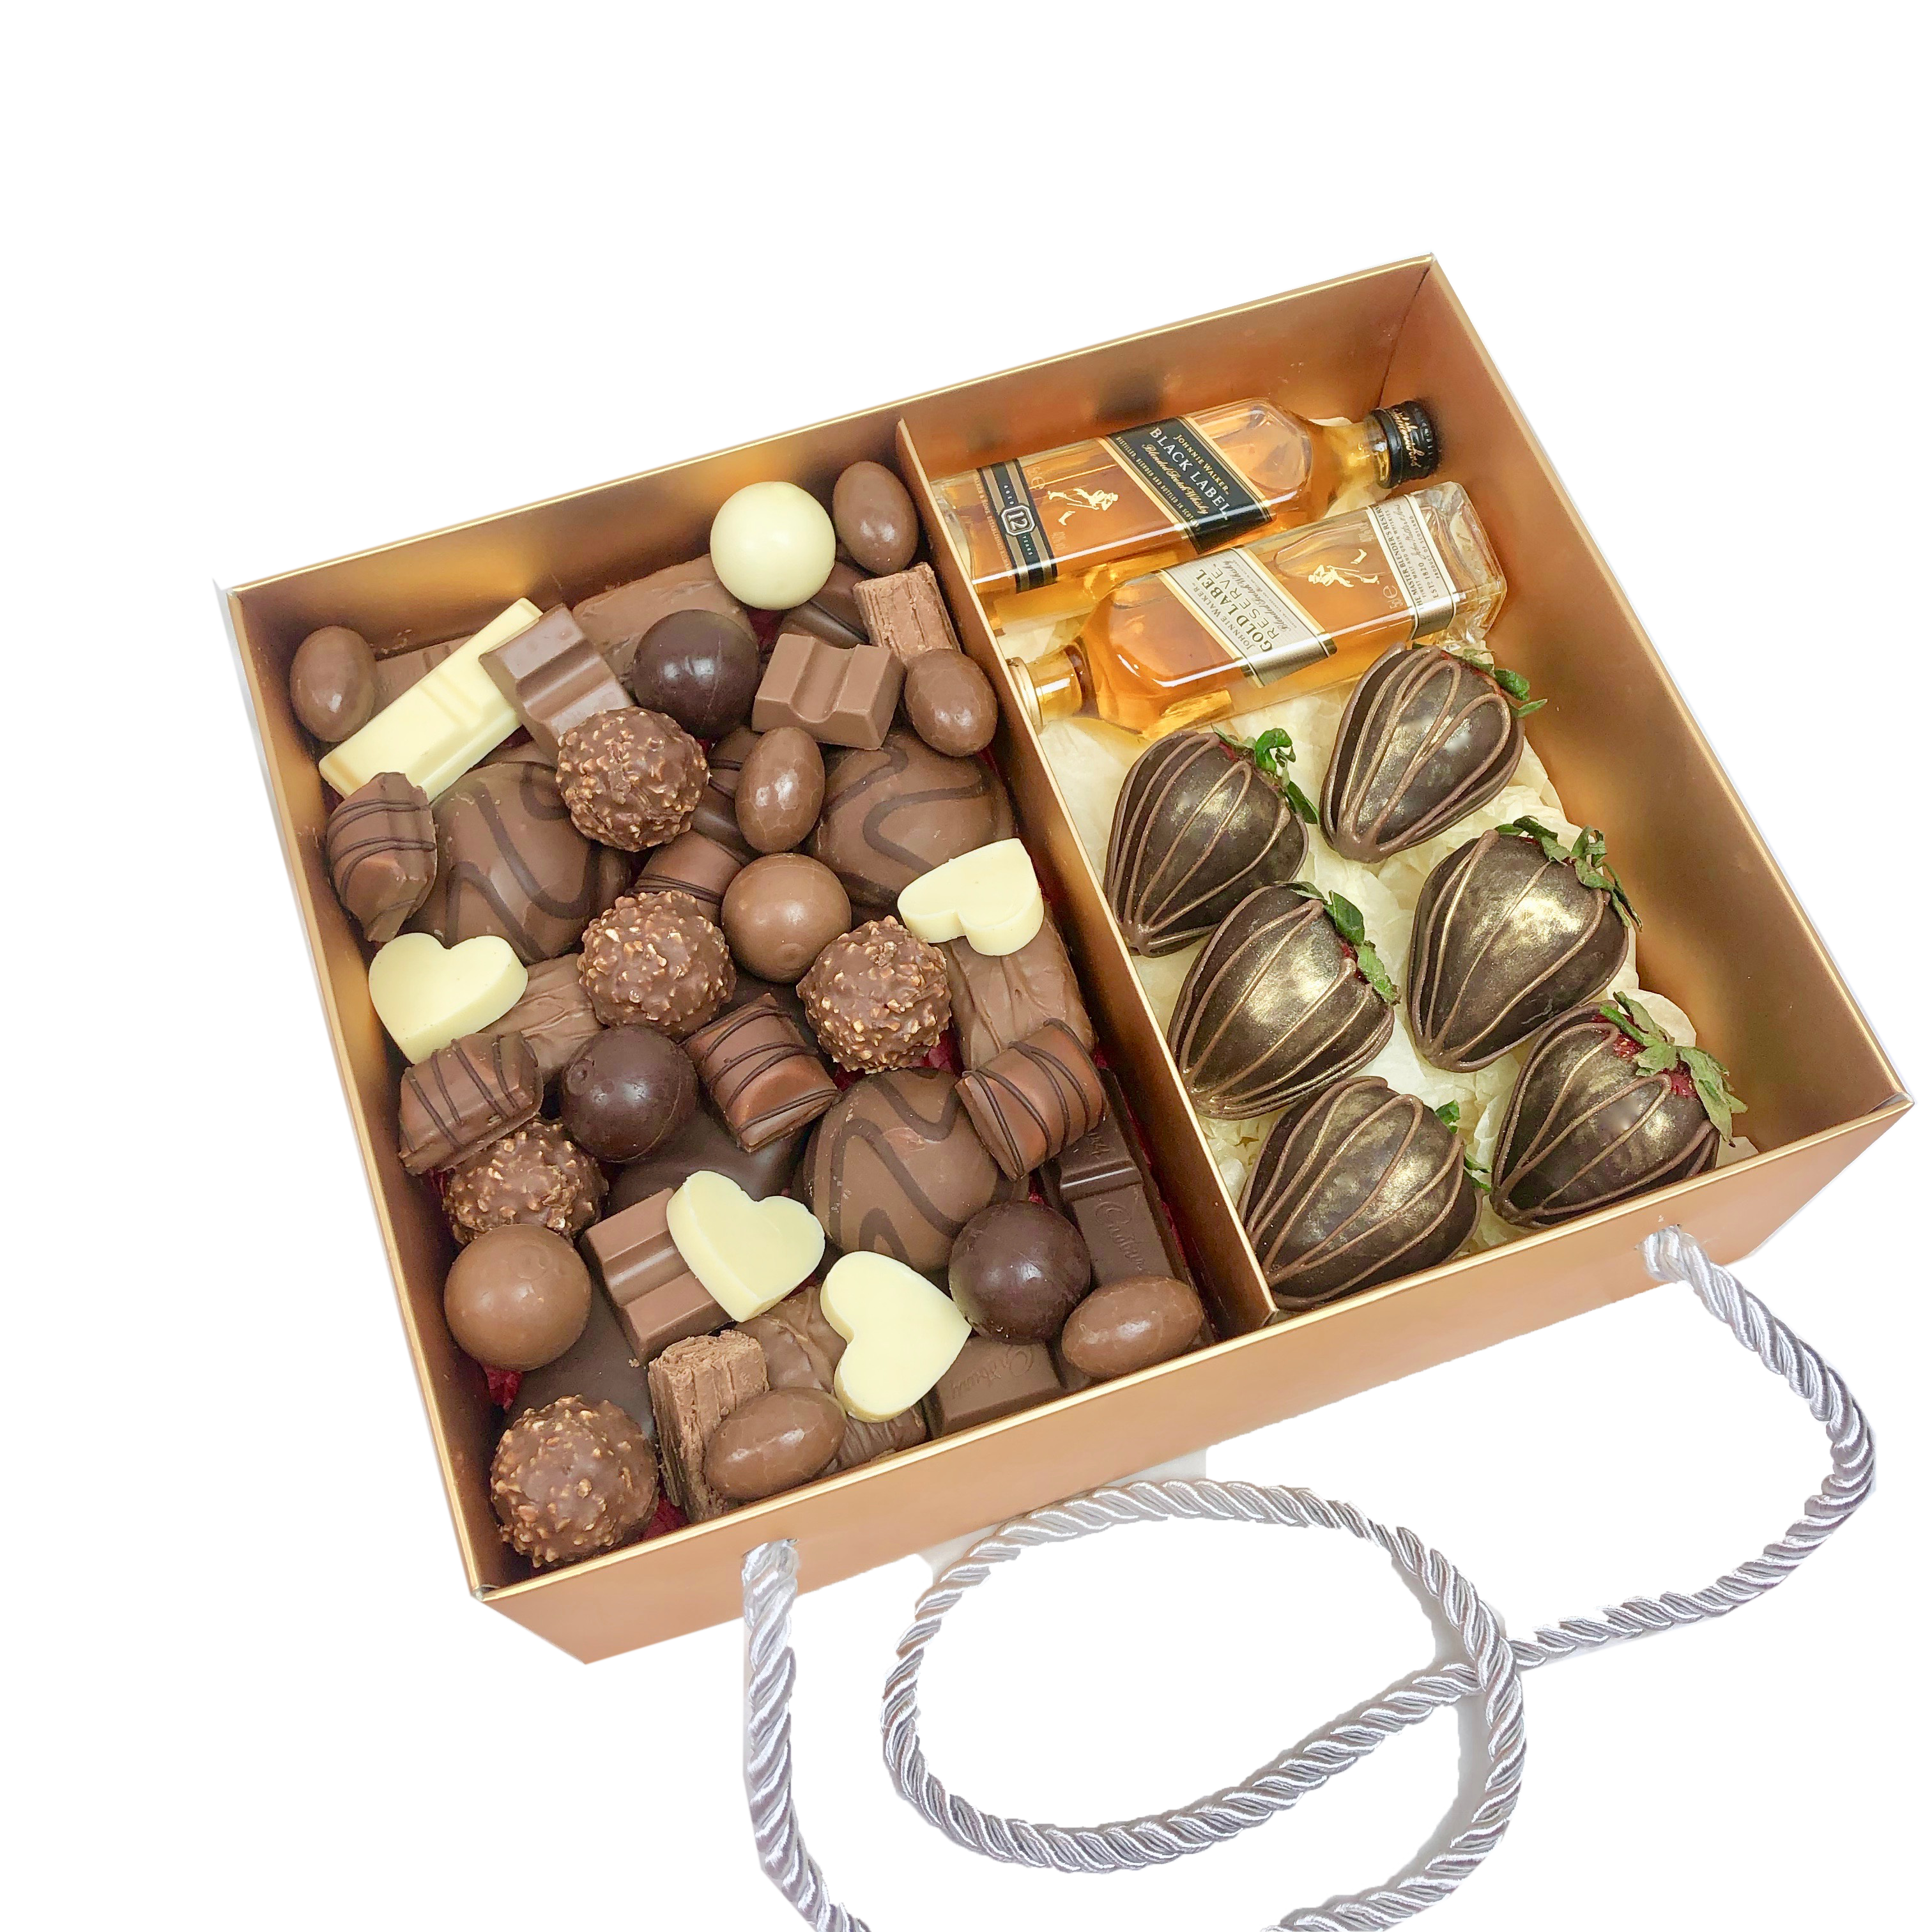 Chocolate Assortment, Strawberries & Whisky Gift Hamper same day delivery Adelaide online gift chocolate boxes